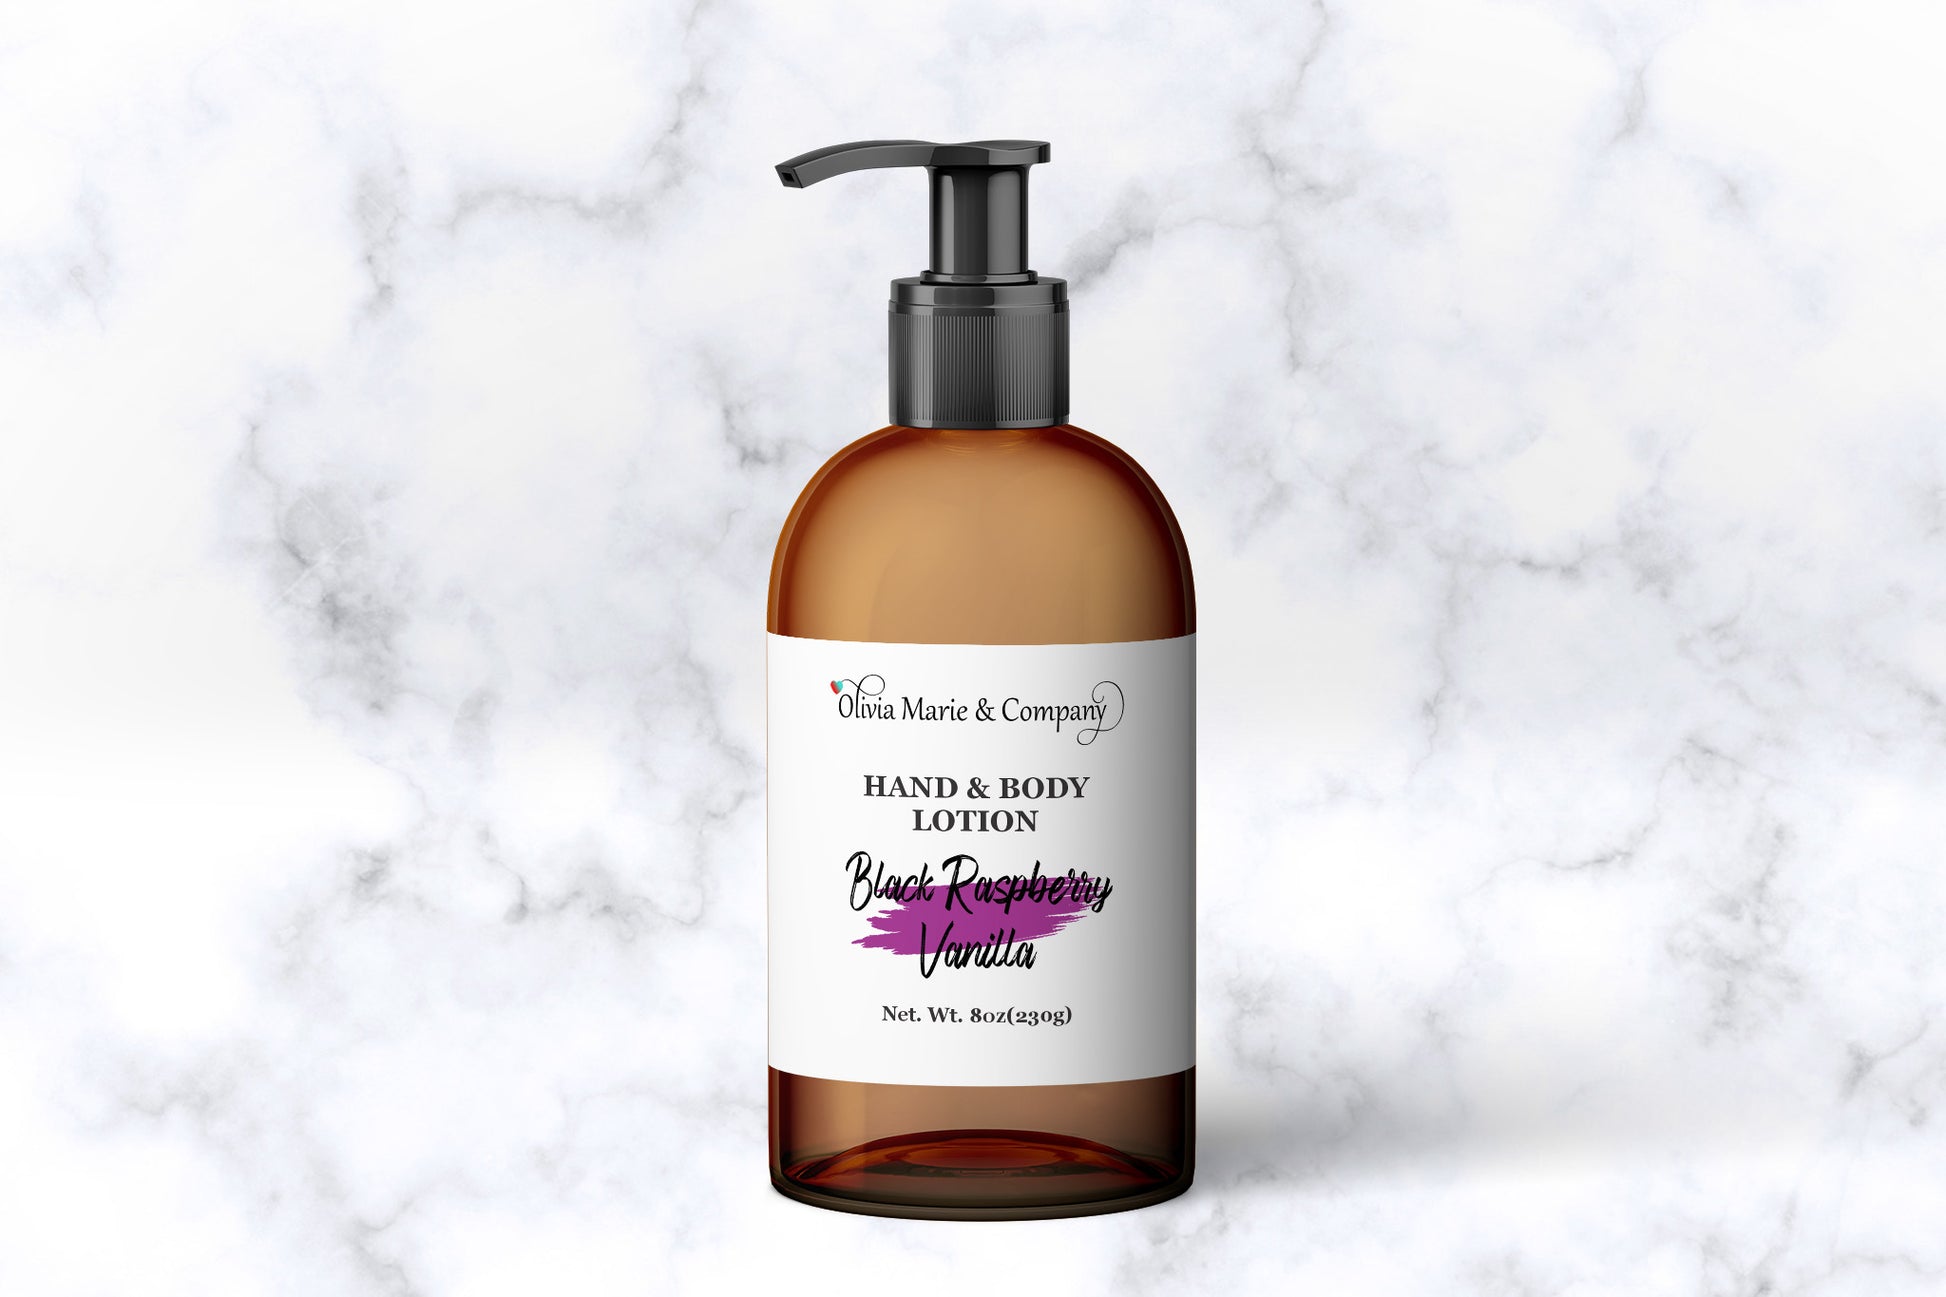 A picture of Black Raspberry Vanilla Lotion bottle.